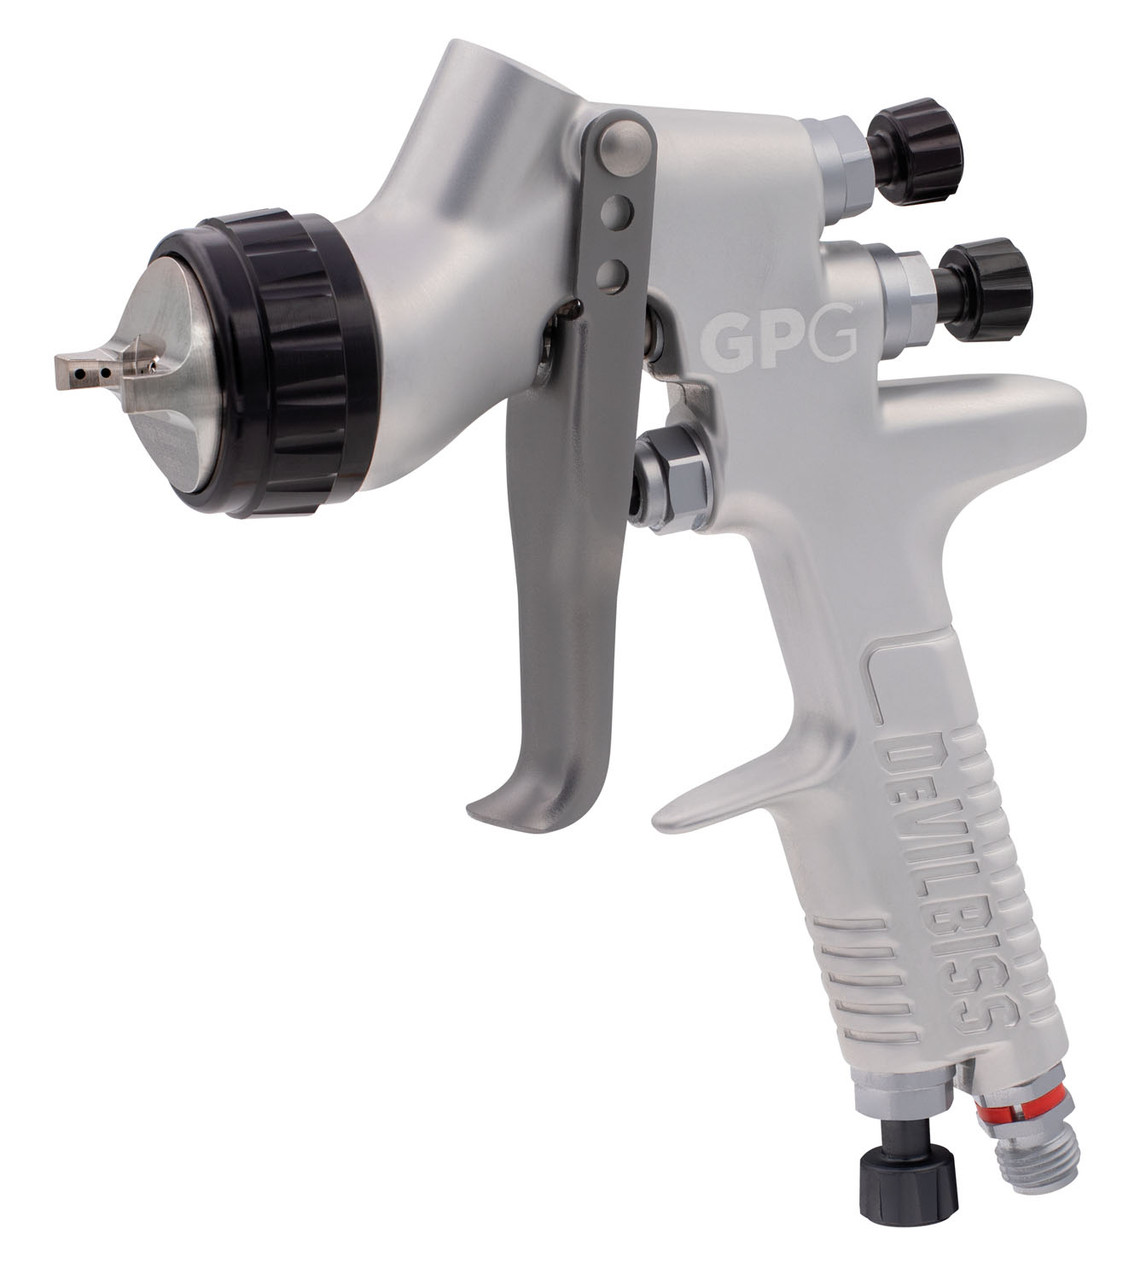 DevilBiss? 905014 Gravity Feed Spray Gun with Cup, 1.8, 2.2 mm Nozzle